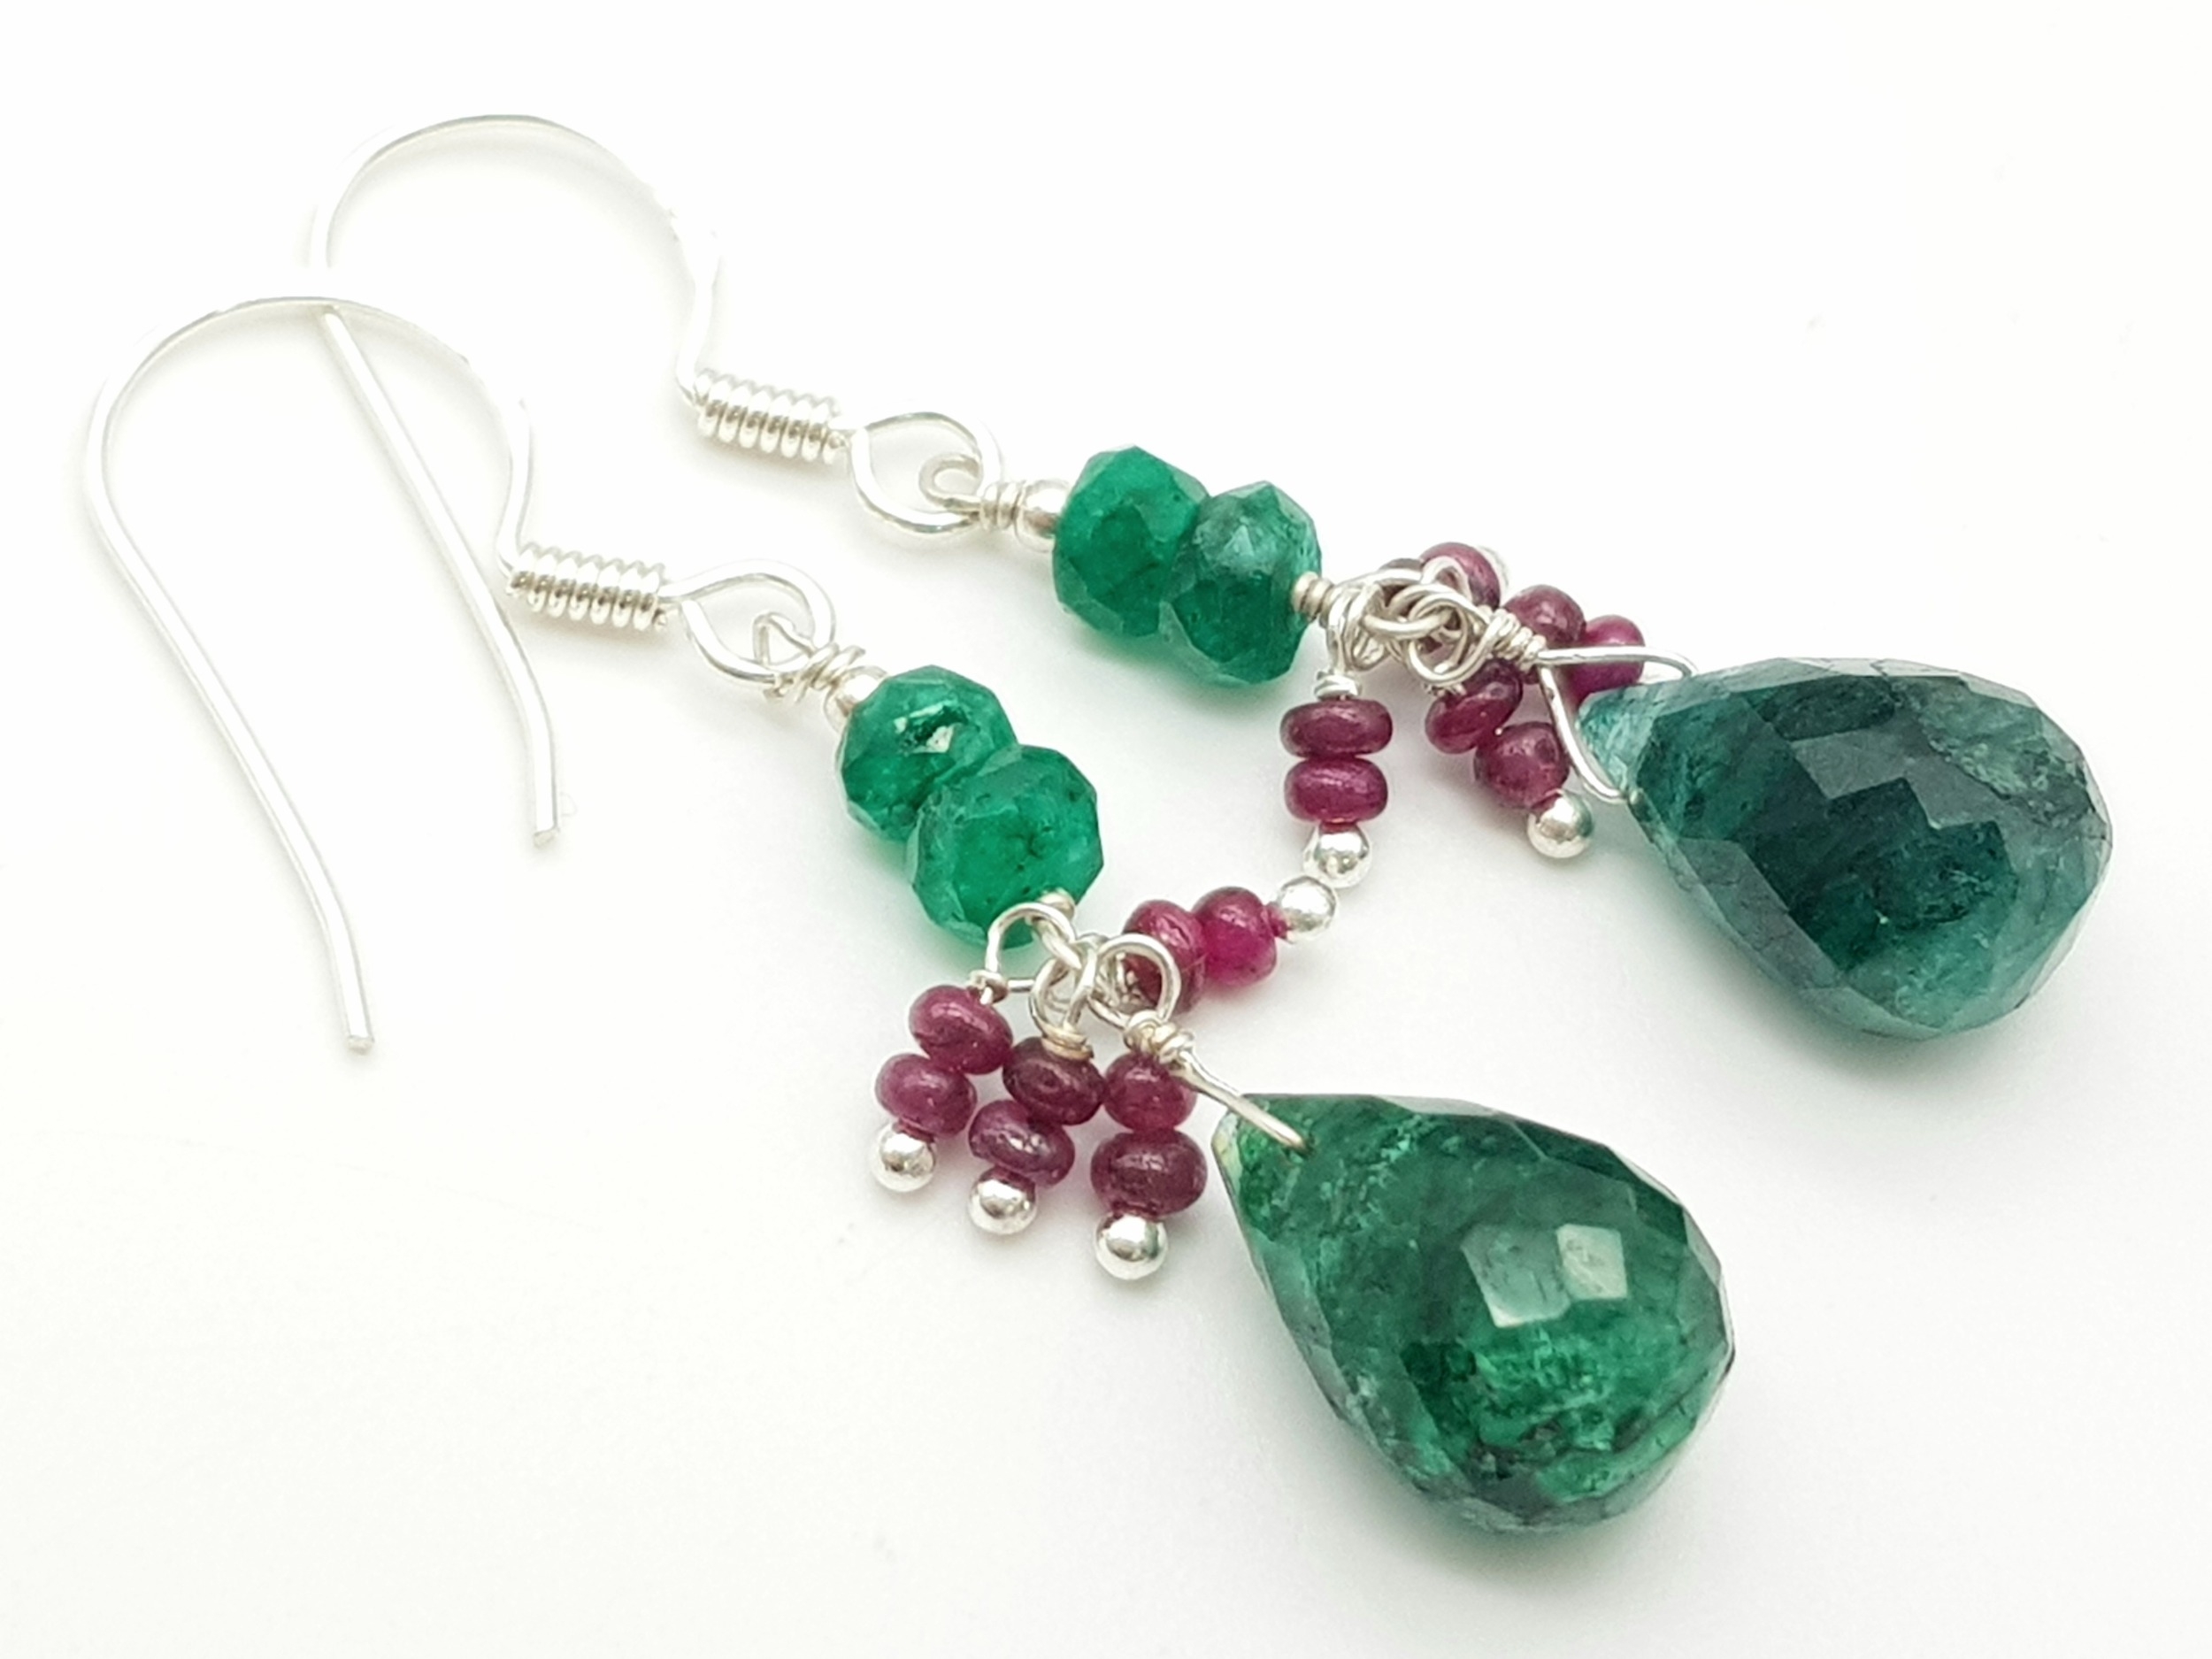 A 160ctw Emerald Teardrop Necklace with Ruby Spacer Beads And a Pair Matching Drop Earrings. 44cm - Image 5 of 5